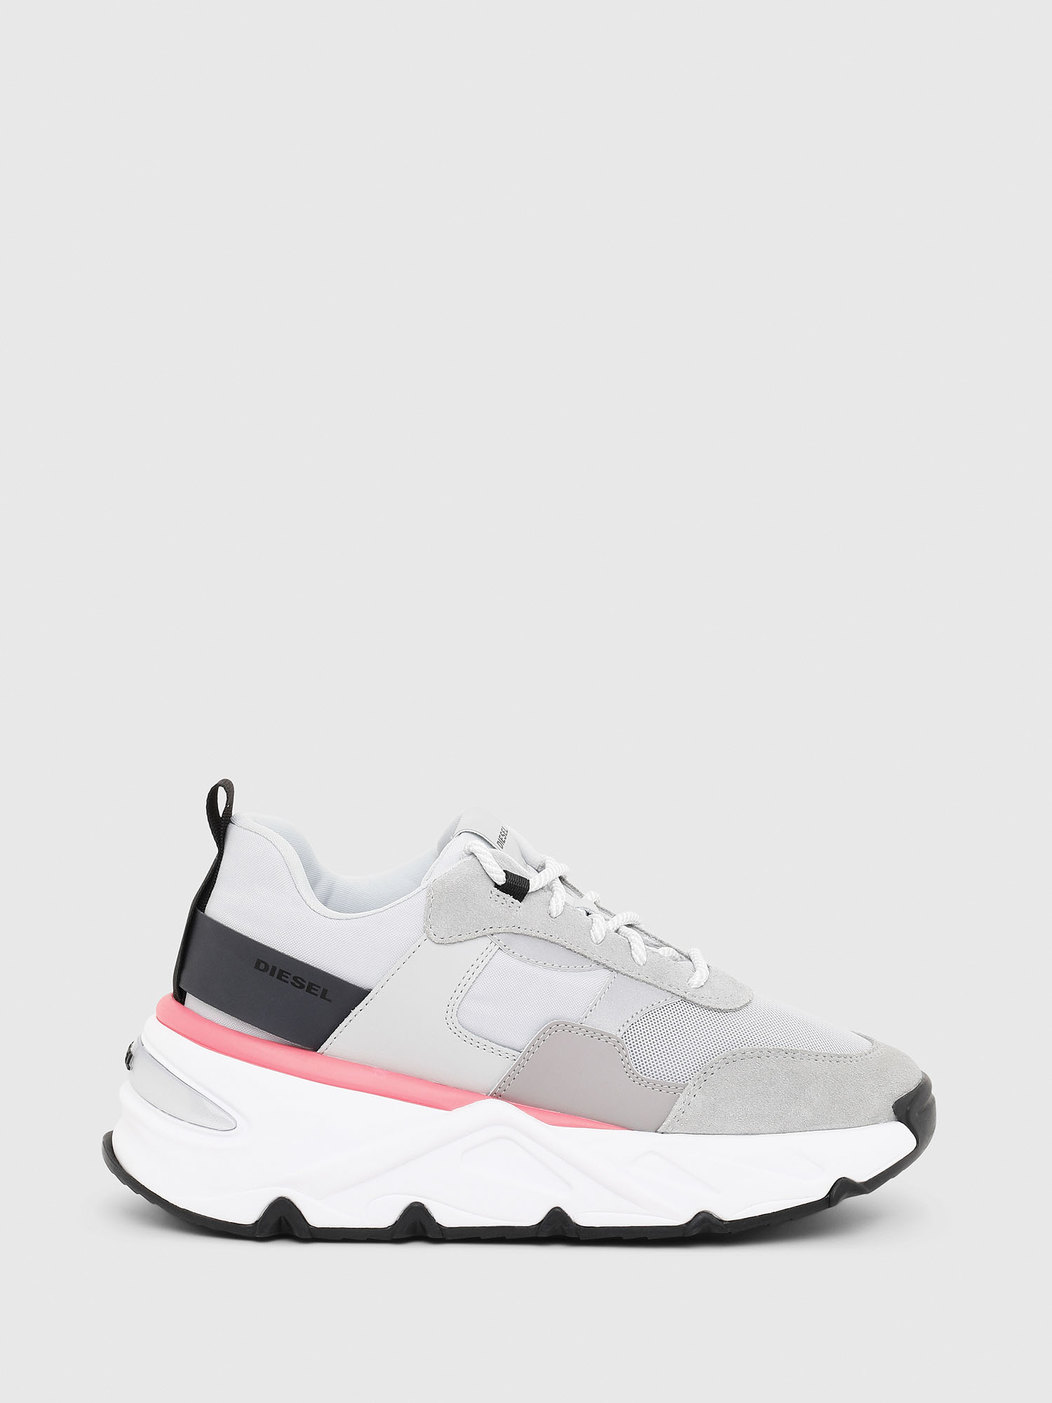 Chunky Sneakers In Nylon, Mesh And Suede